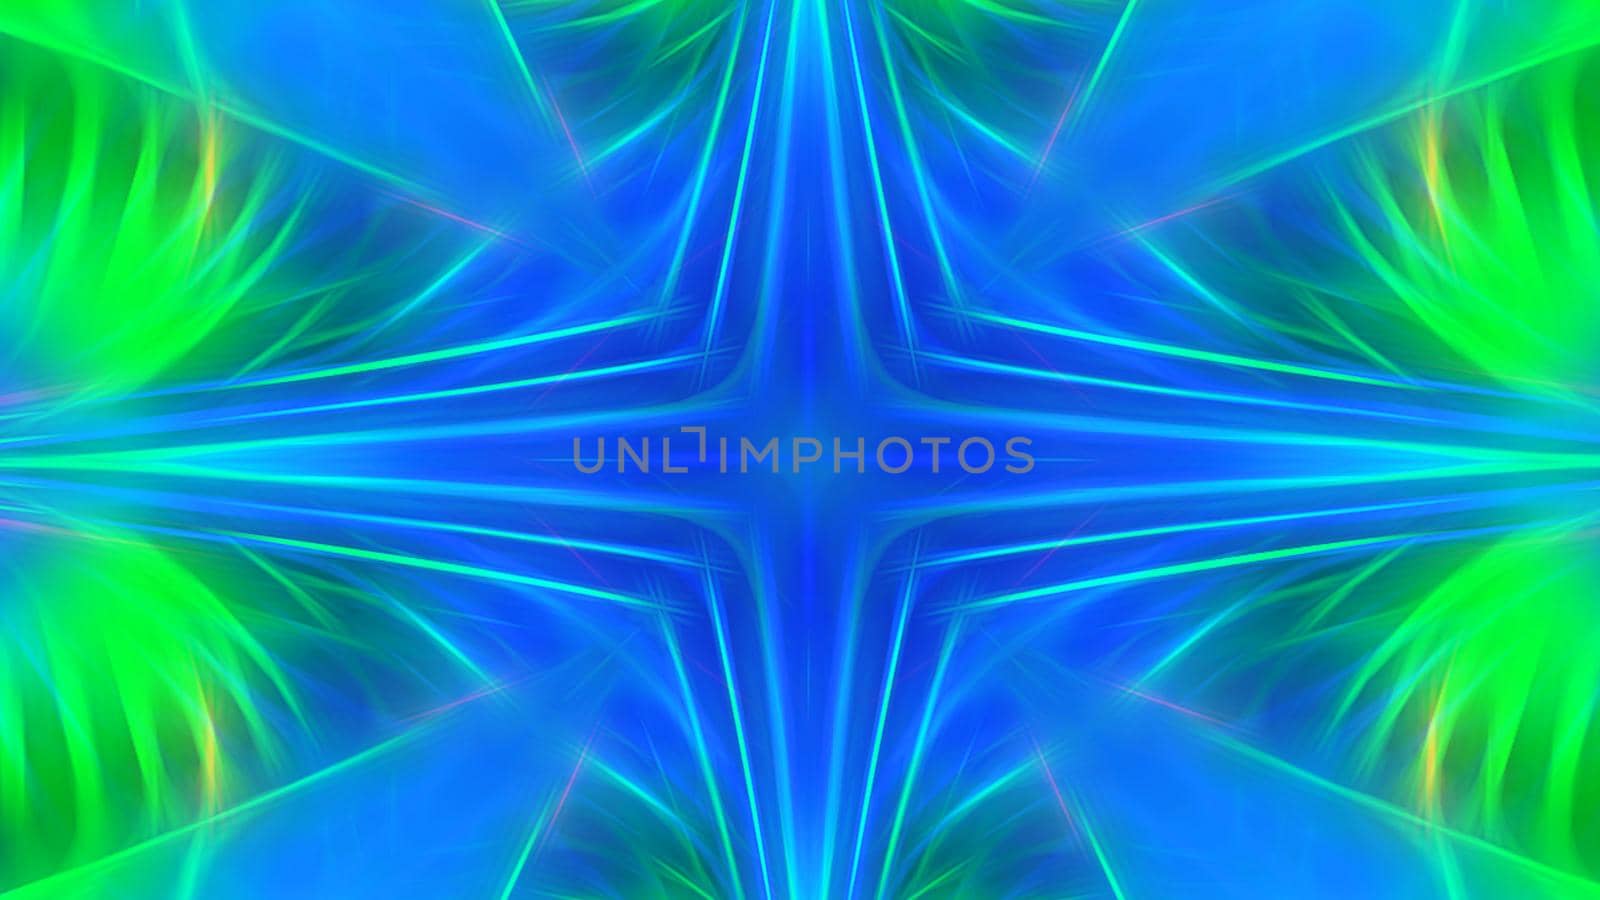 Abstract fractal blue green background with symmetrical ornament.